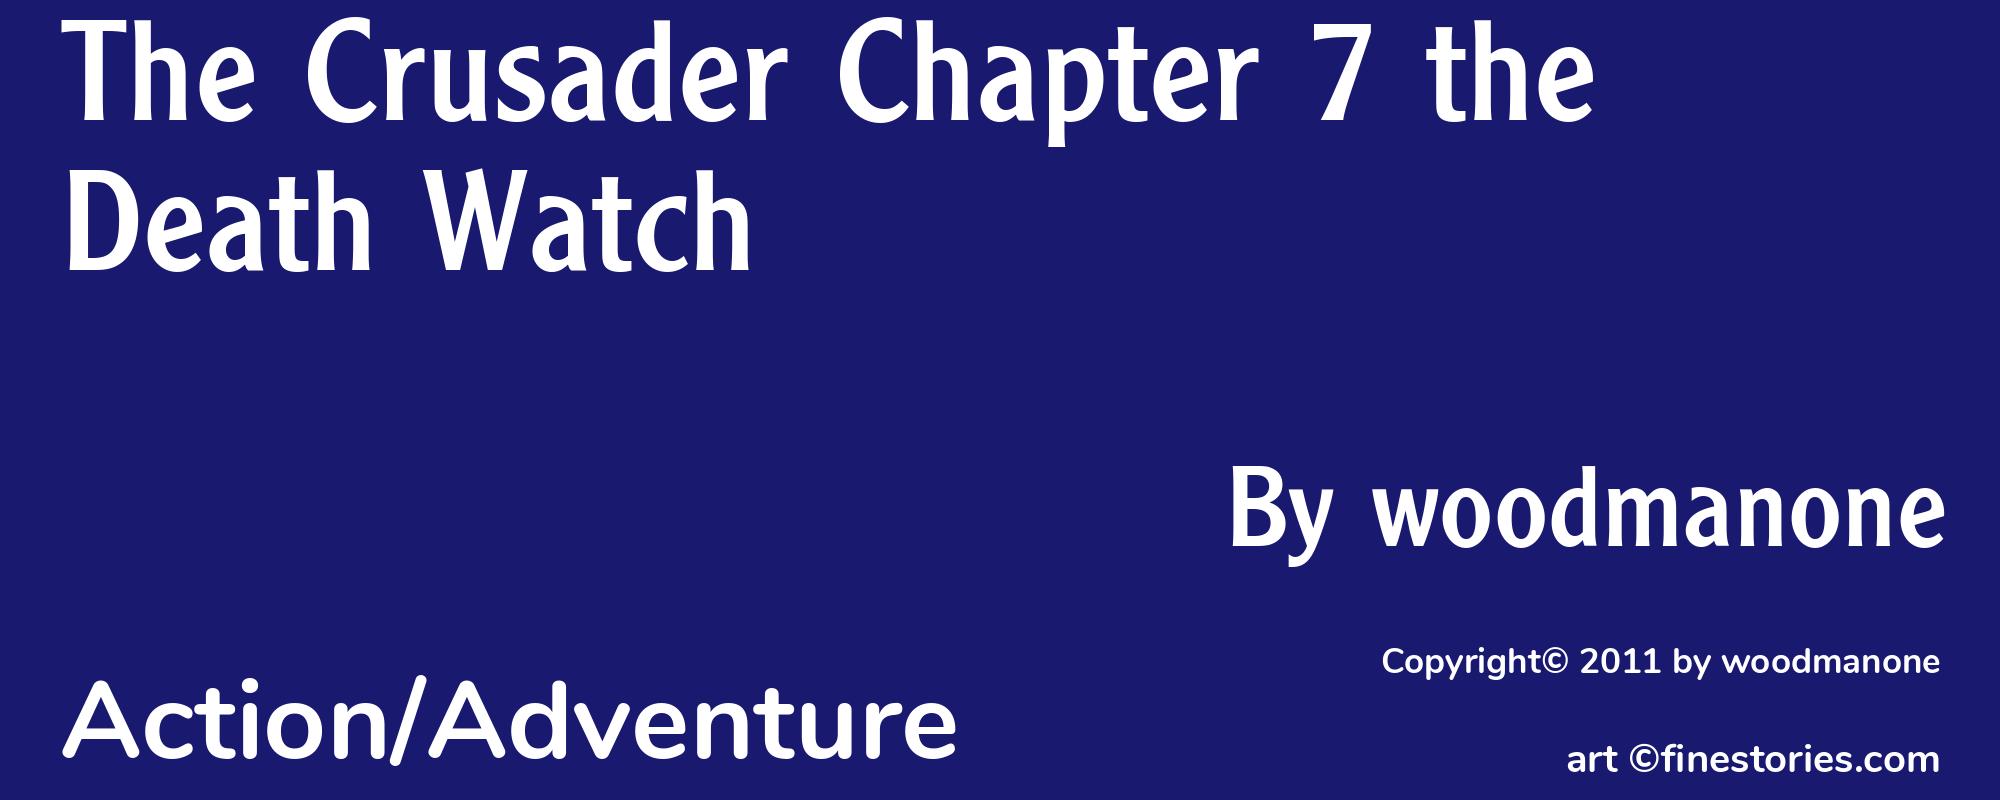 The Crusader Chapter 7 the Death Watch - Cover